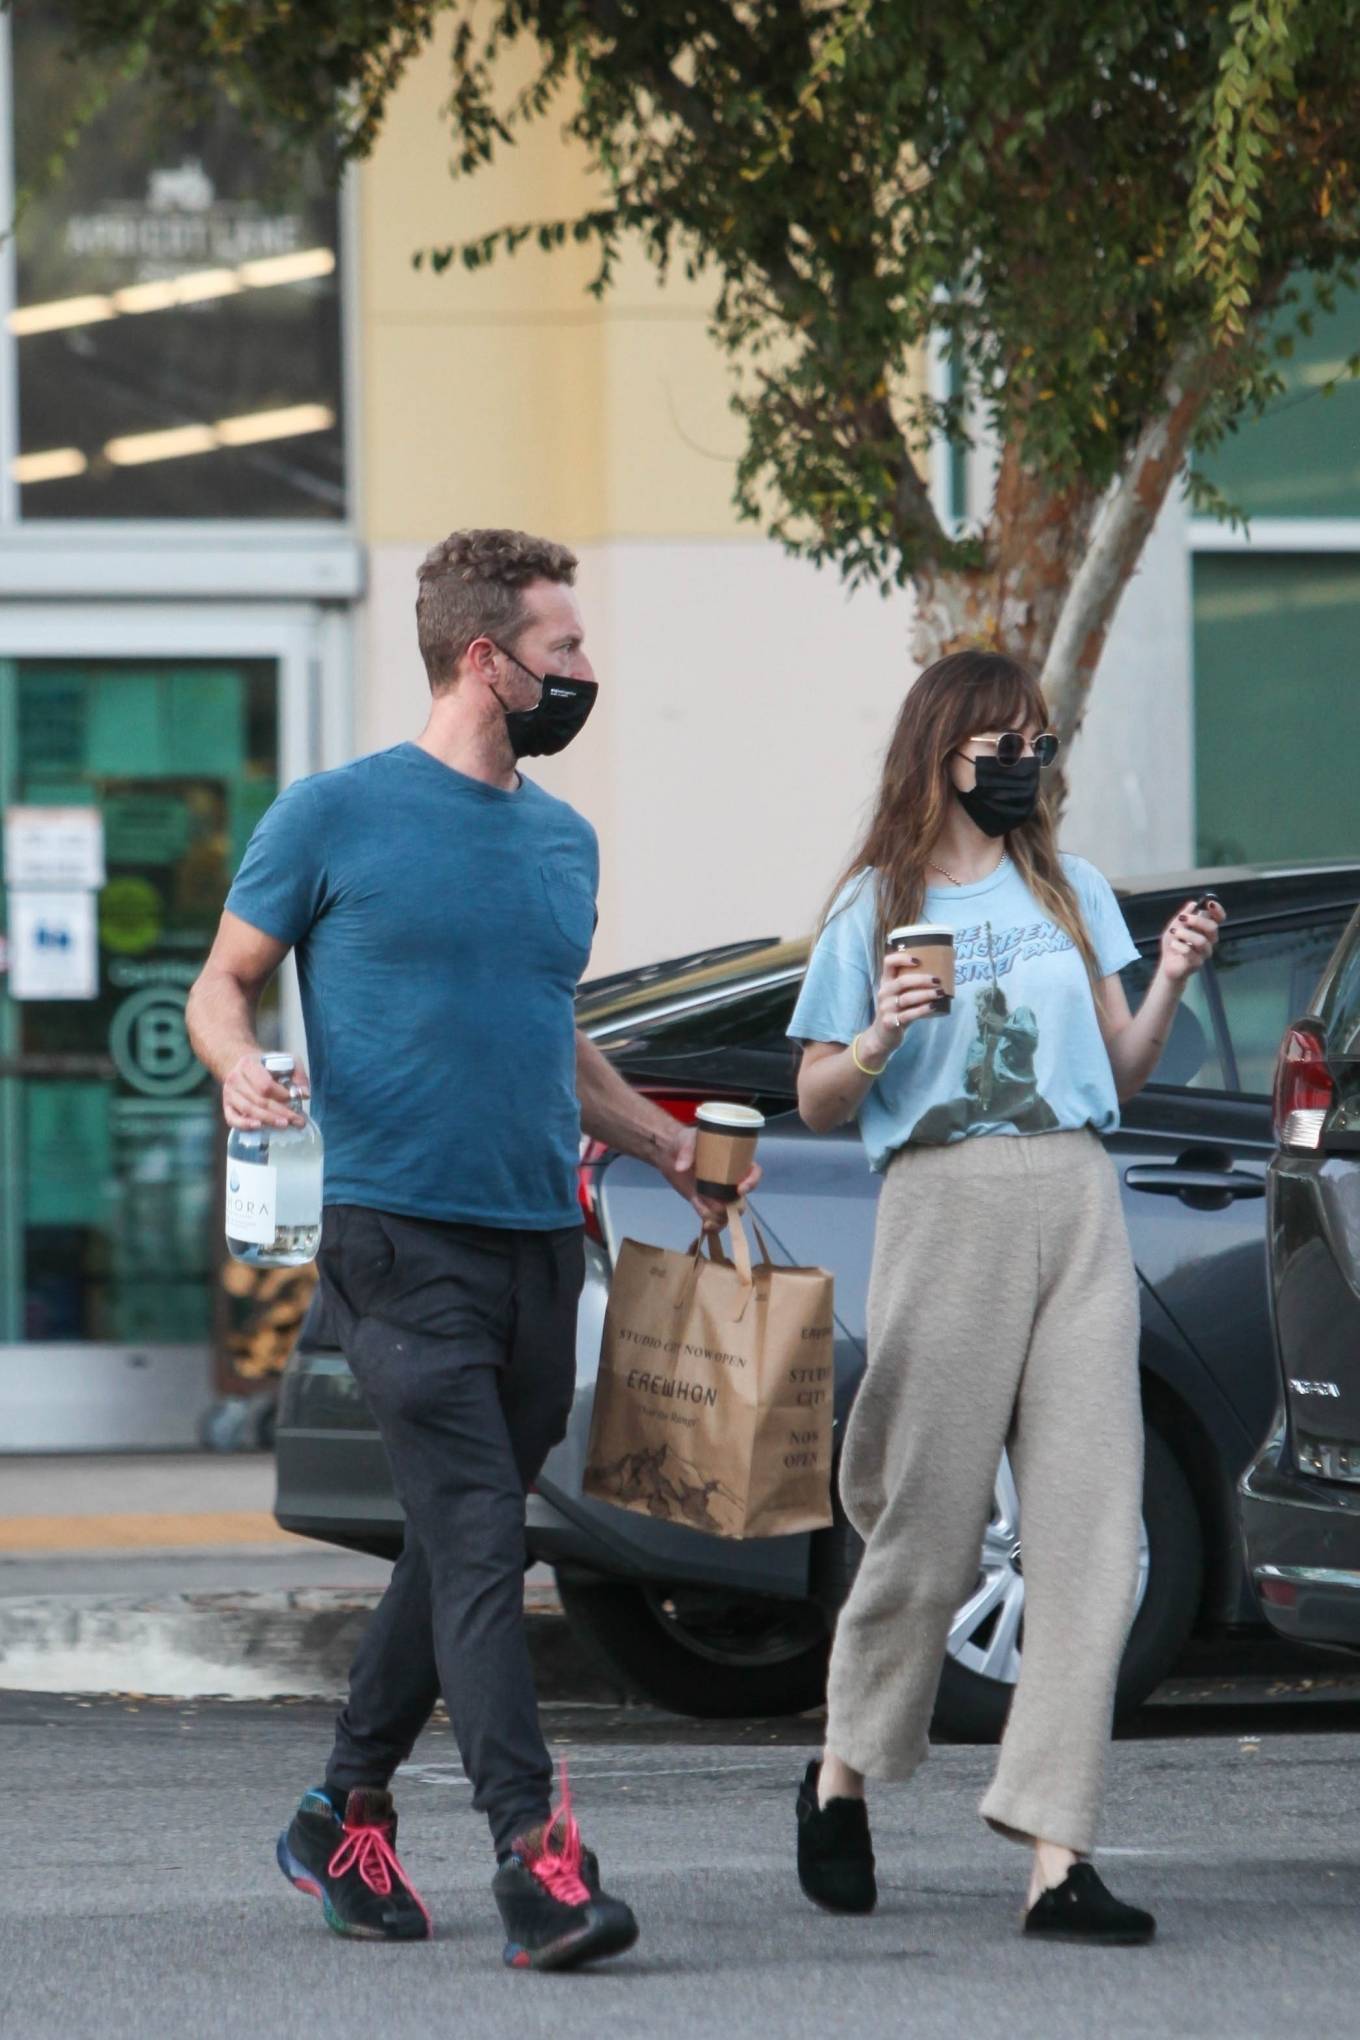 Dakota Johnson - With Chris Martin shopping together at Erewhon Market in Los Angeles